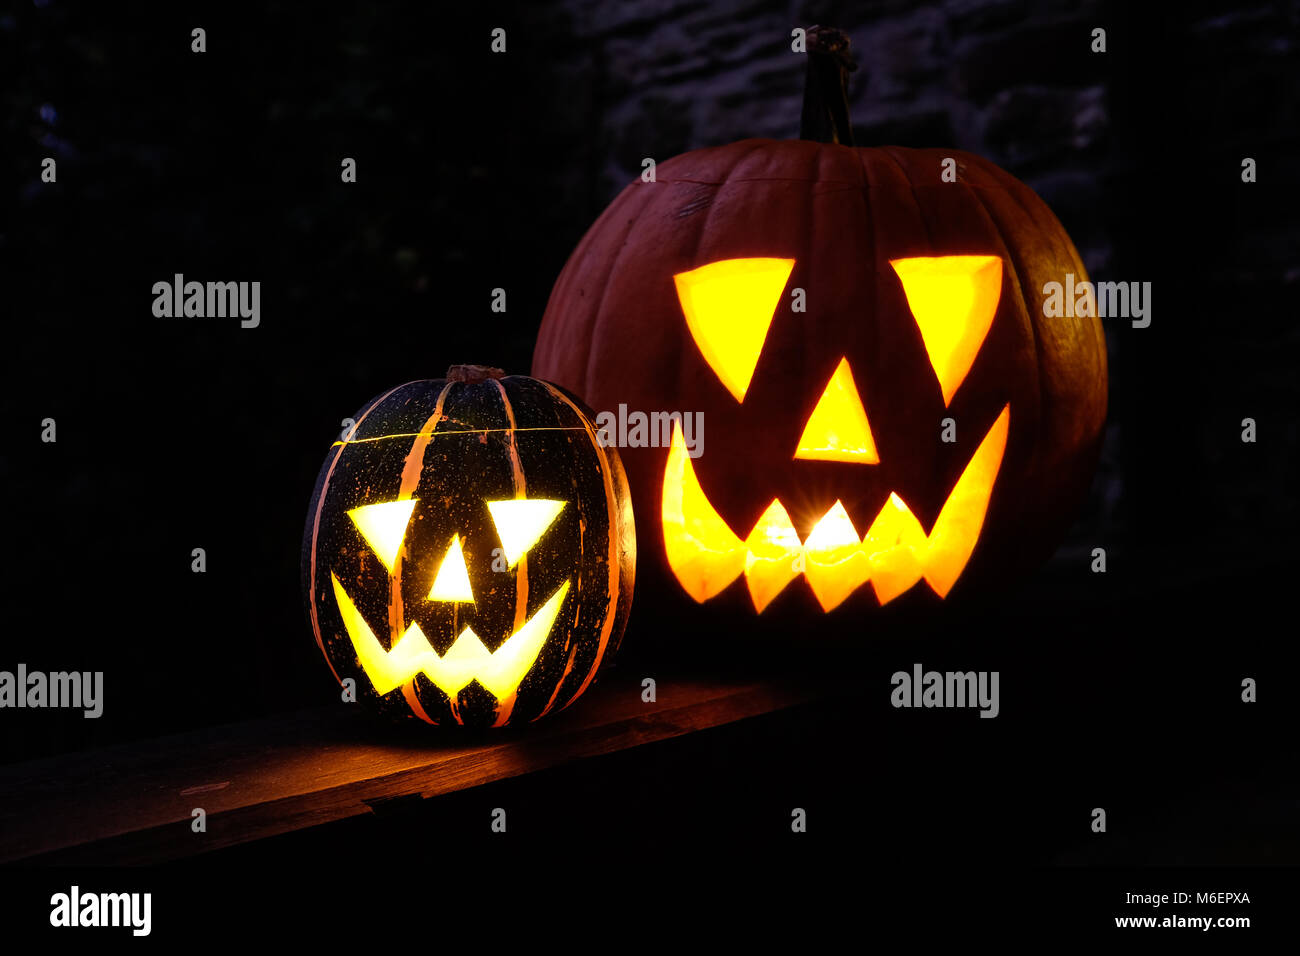 Halloween pumpkins one large and one small Stock Photo